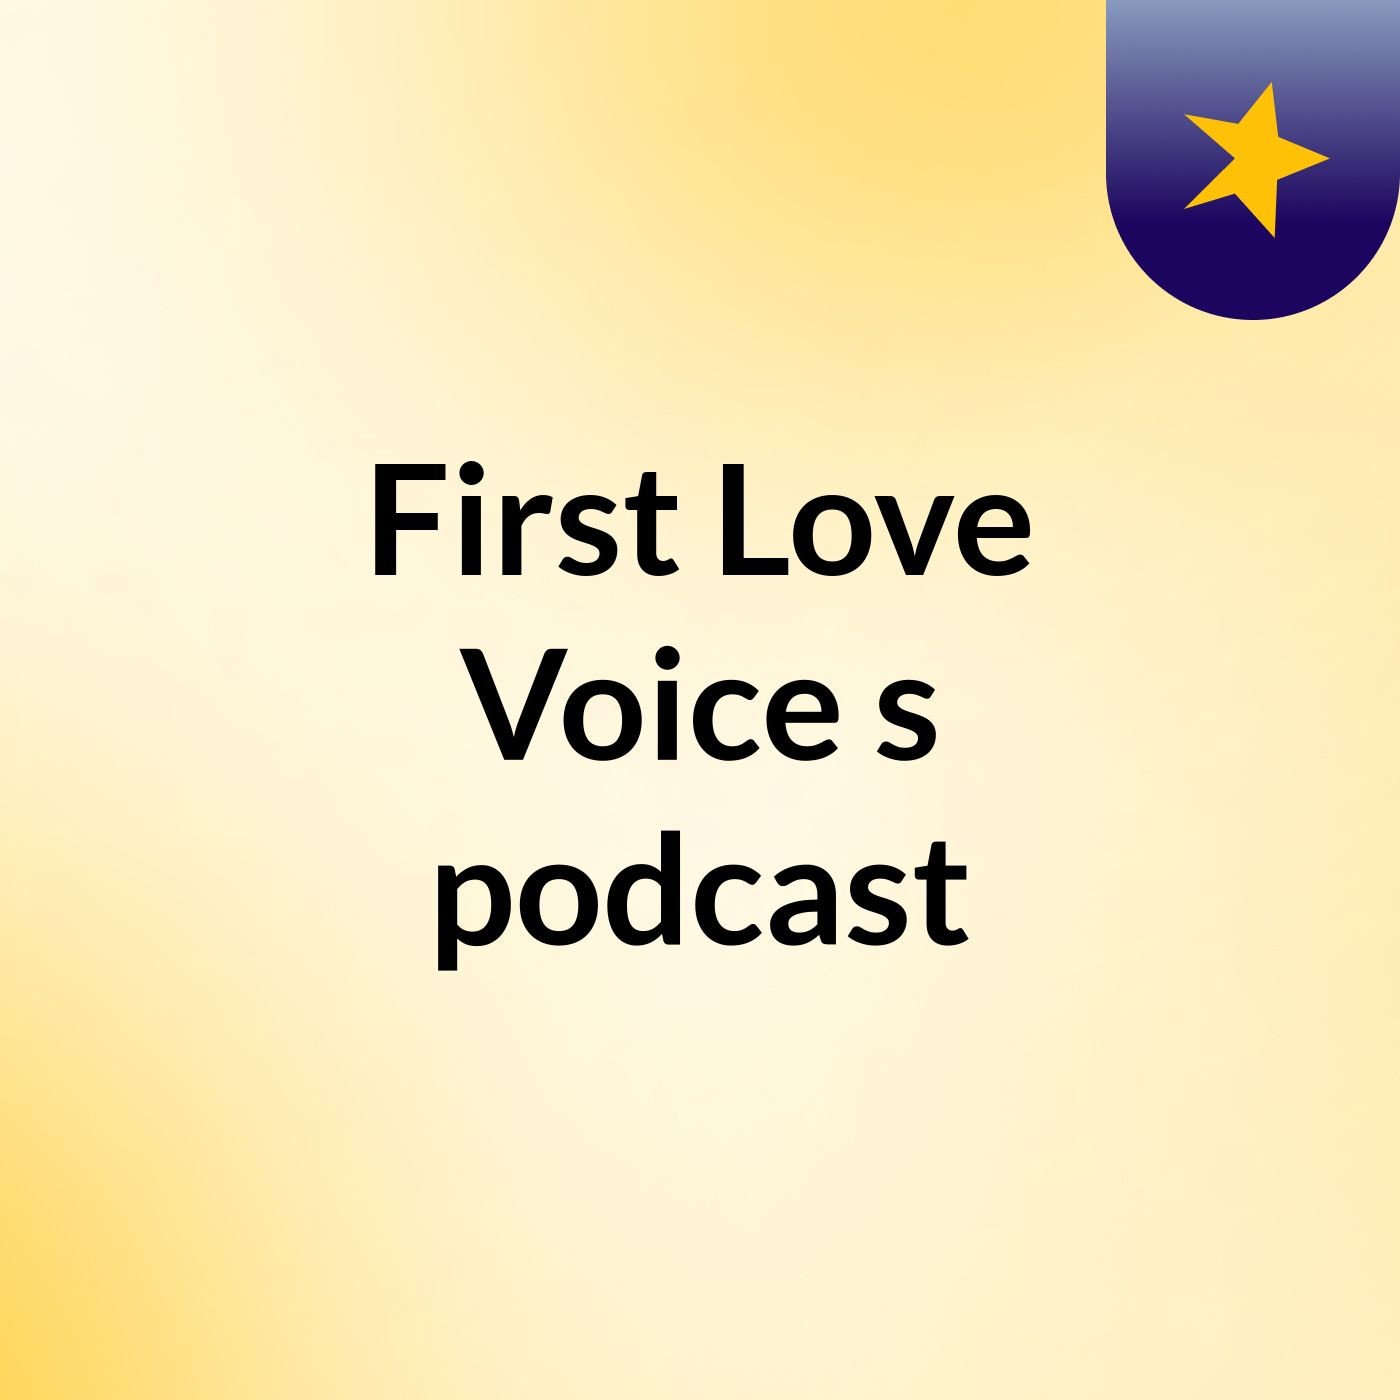 First Love Voice's podcast